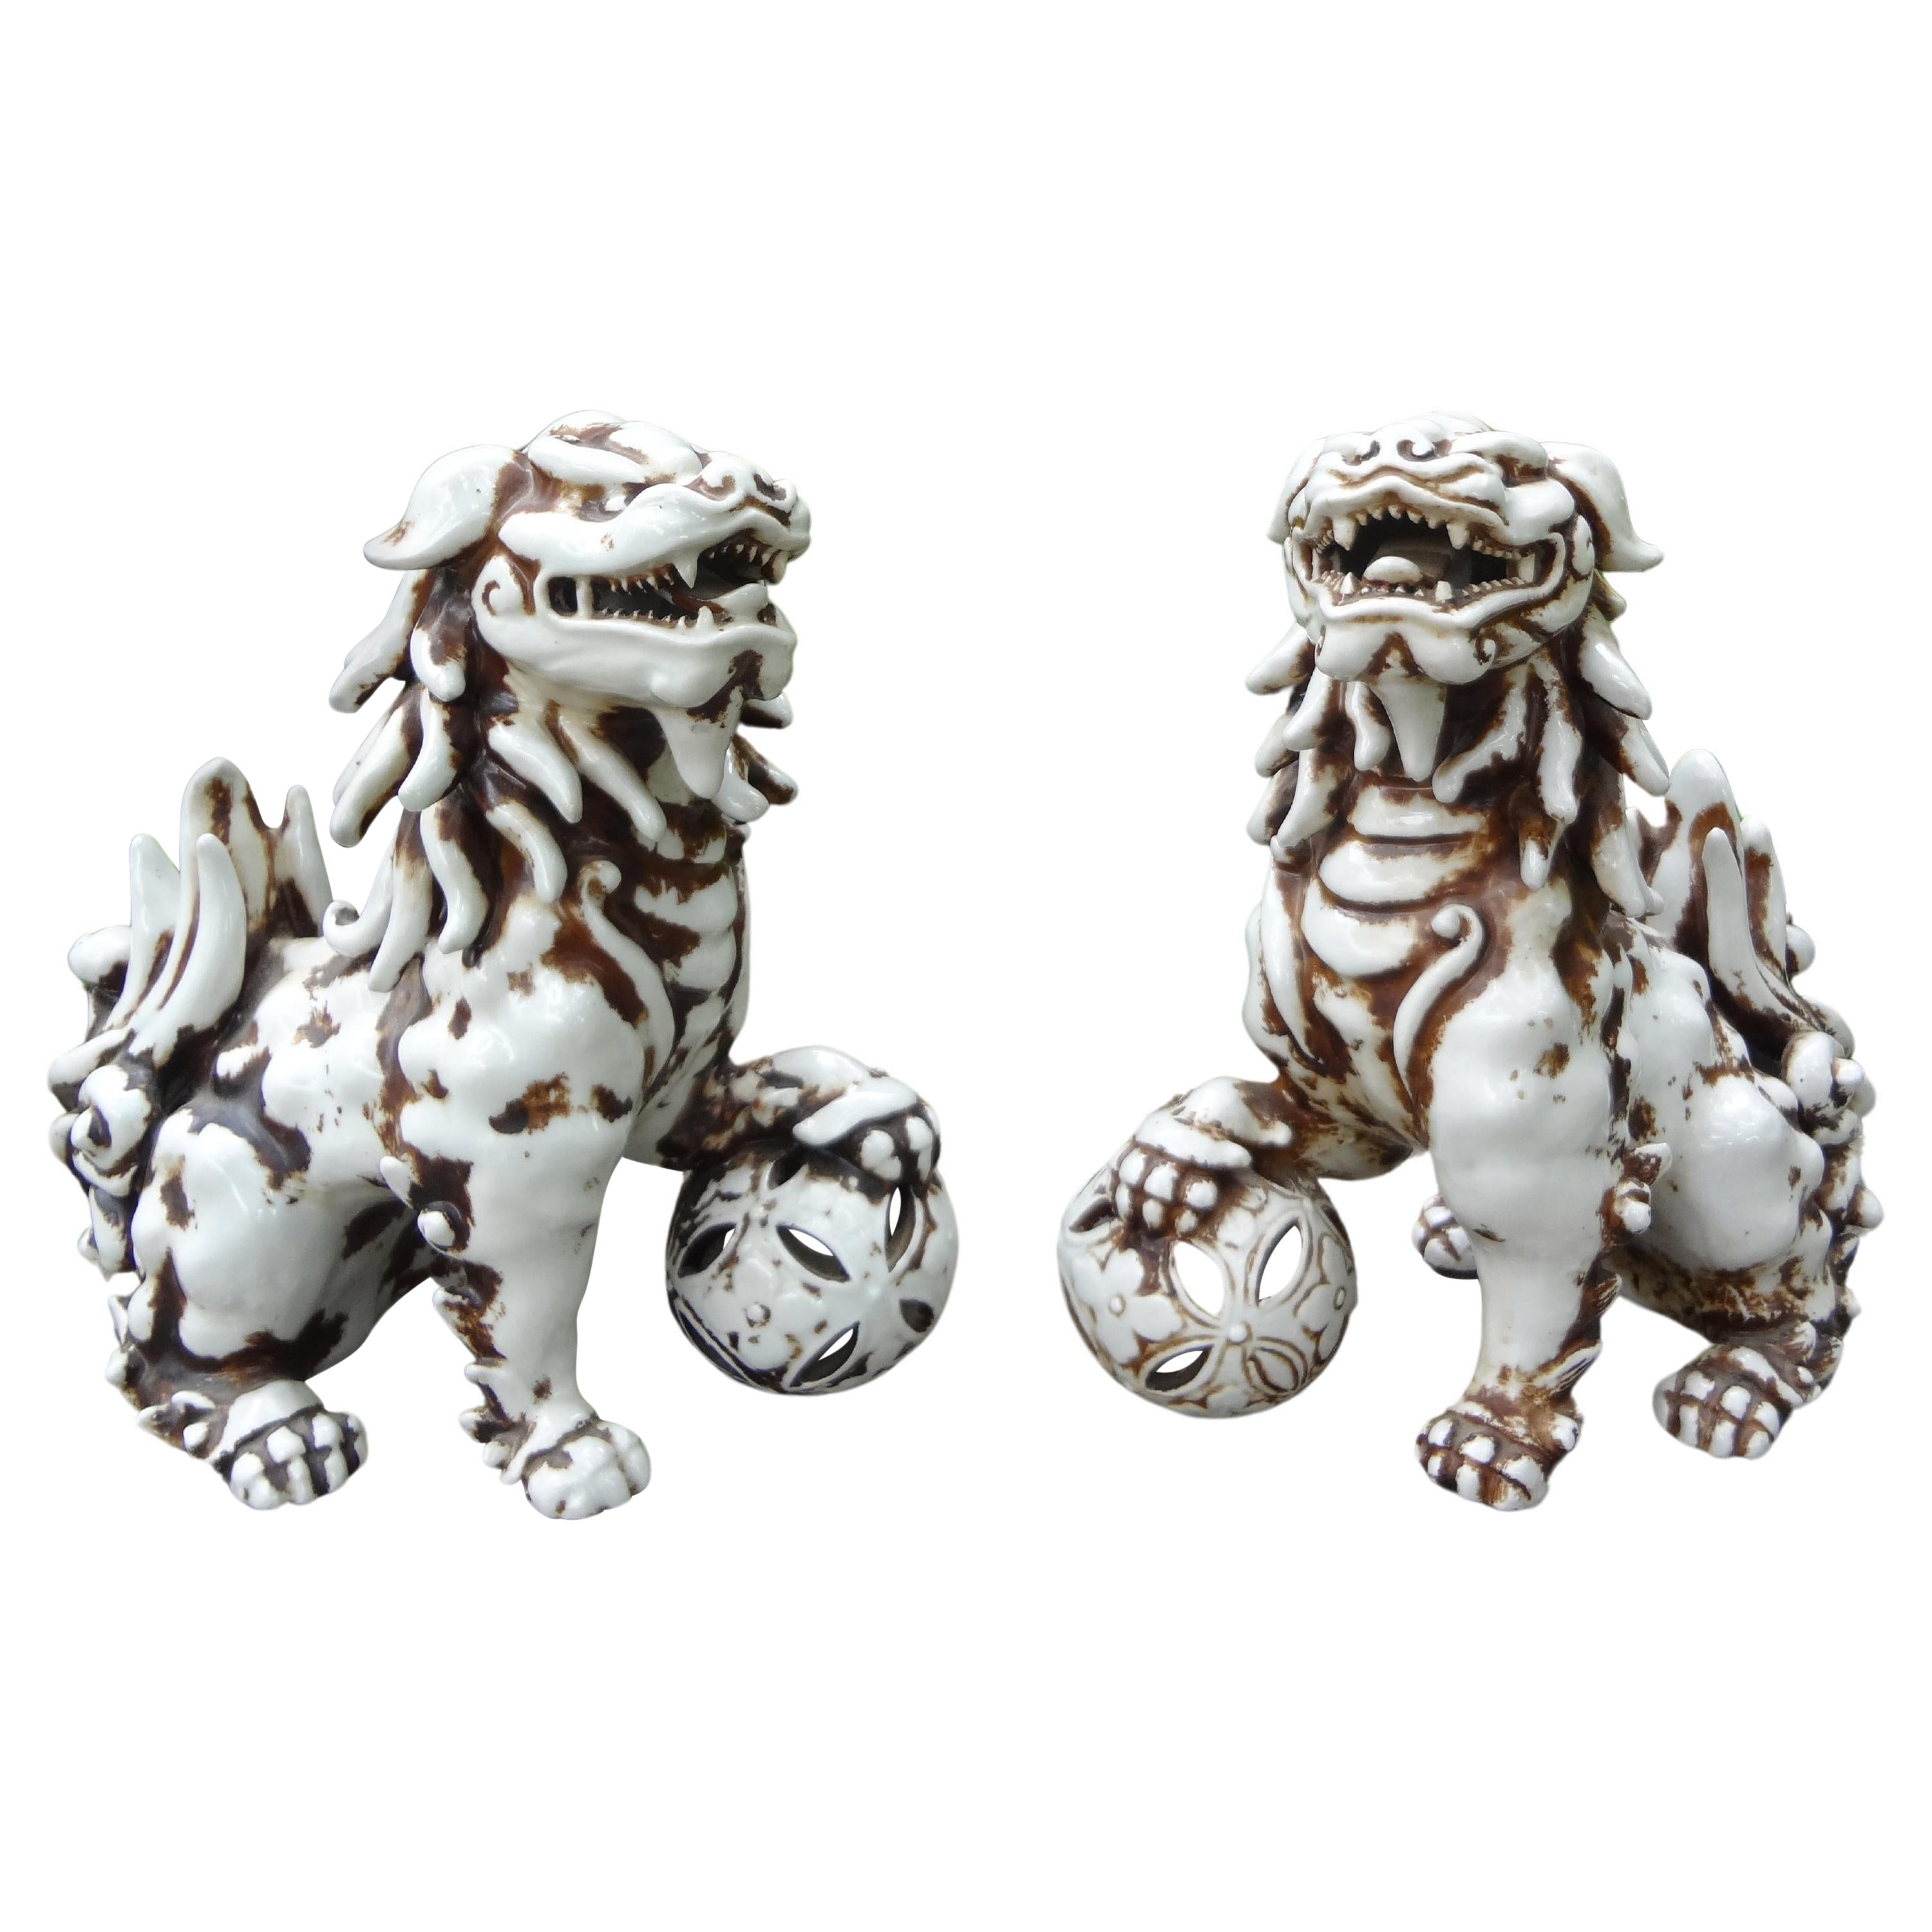 Pair Of Chinese Glazed Ceramic Foo Dogs For Sale